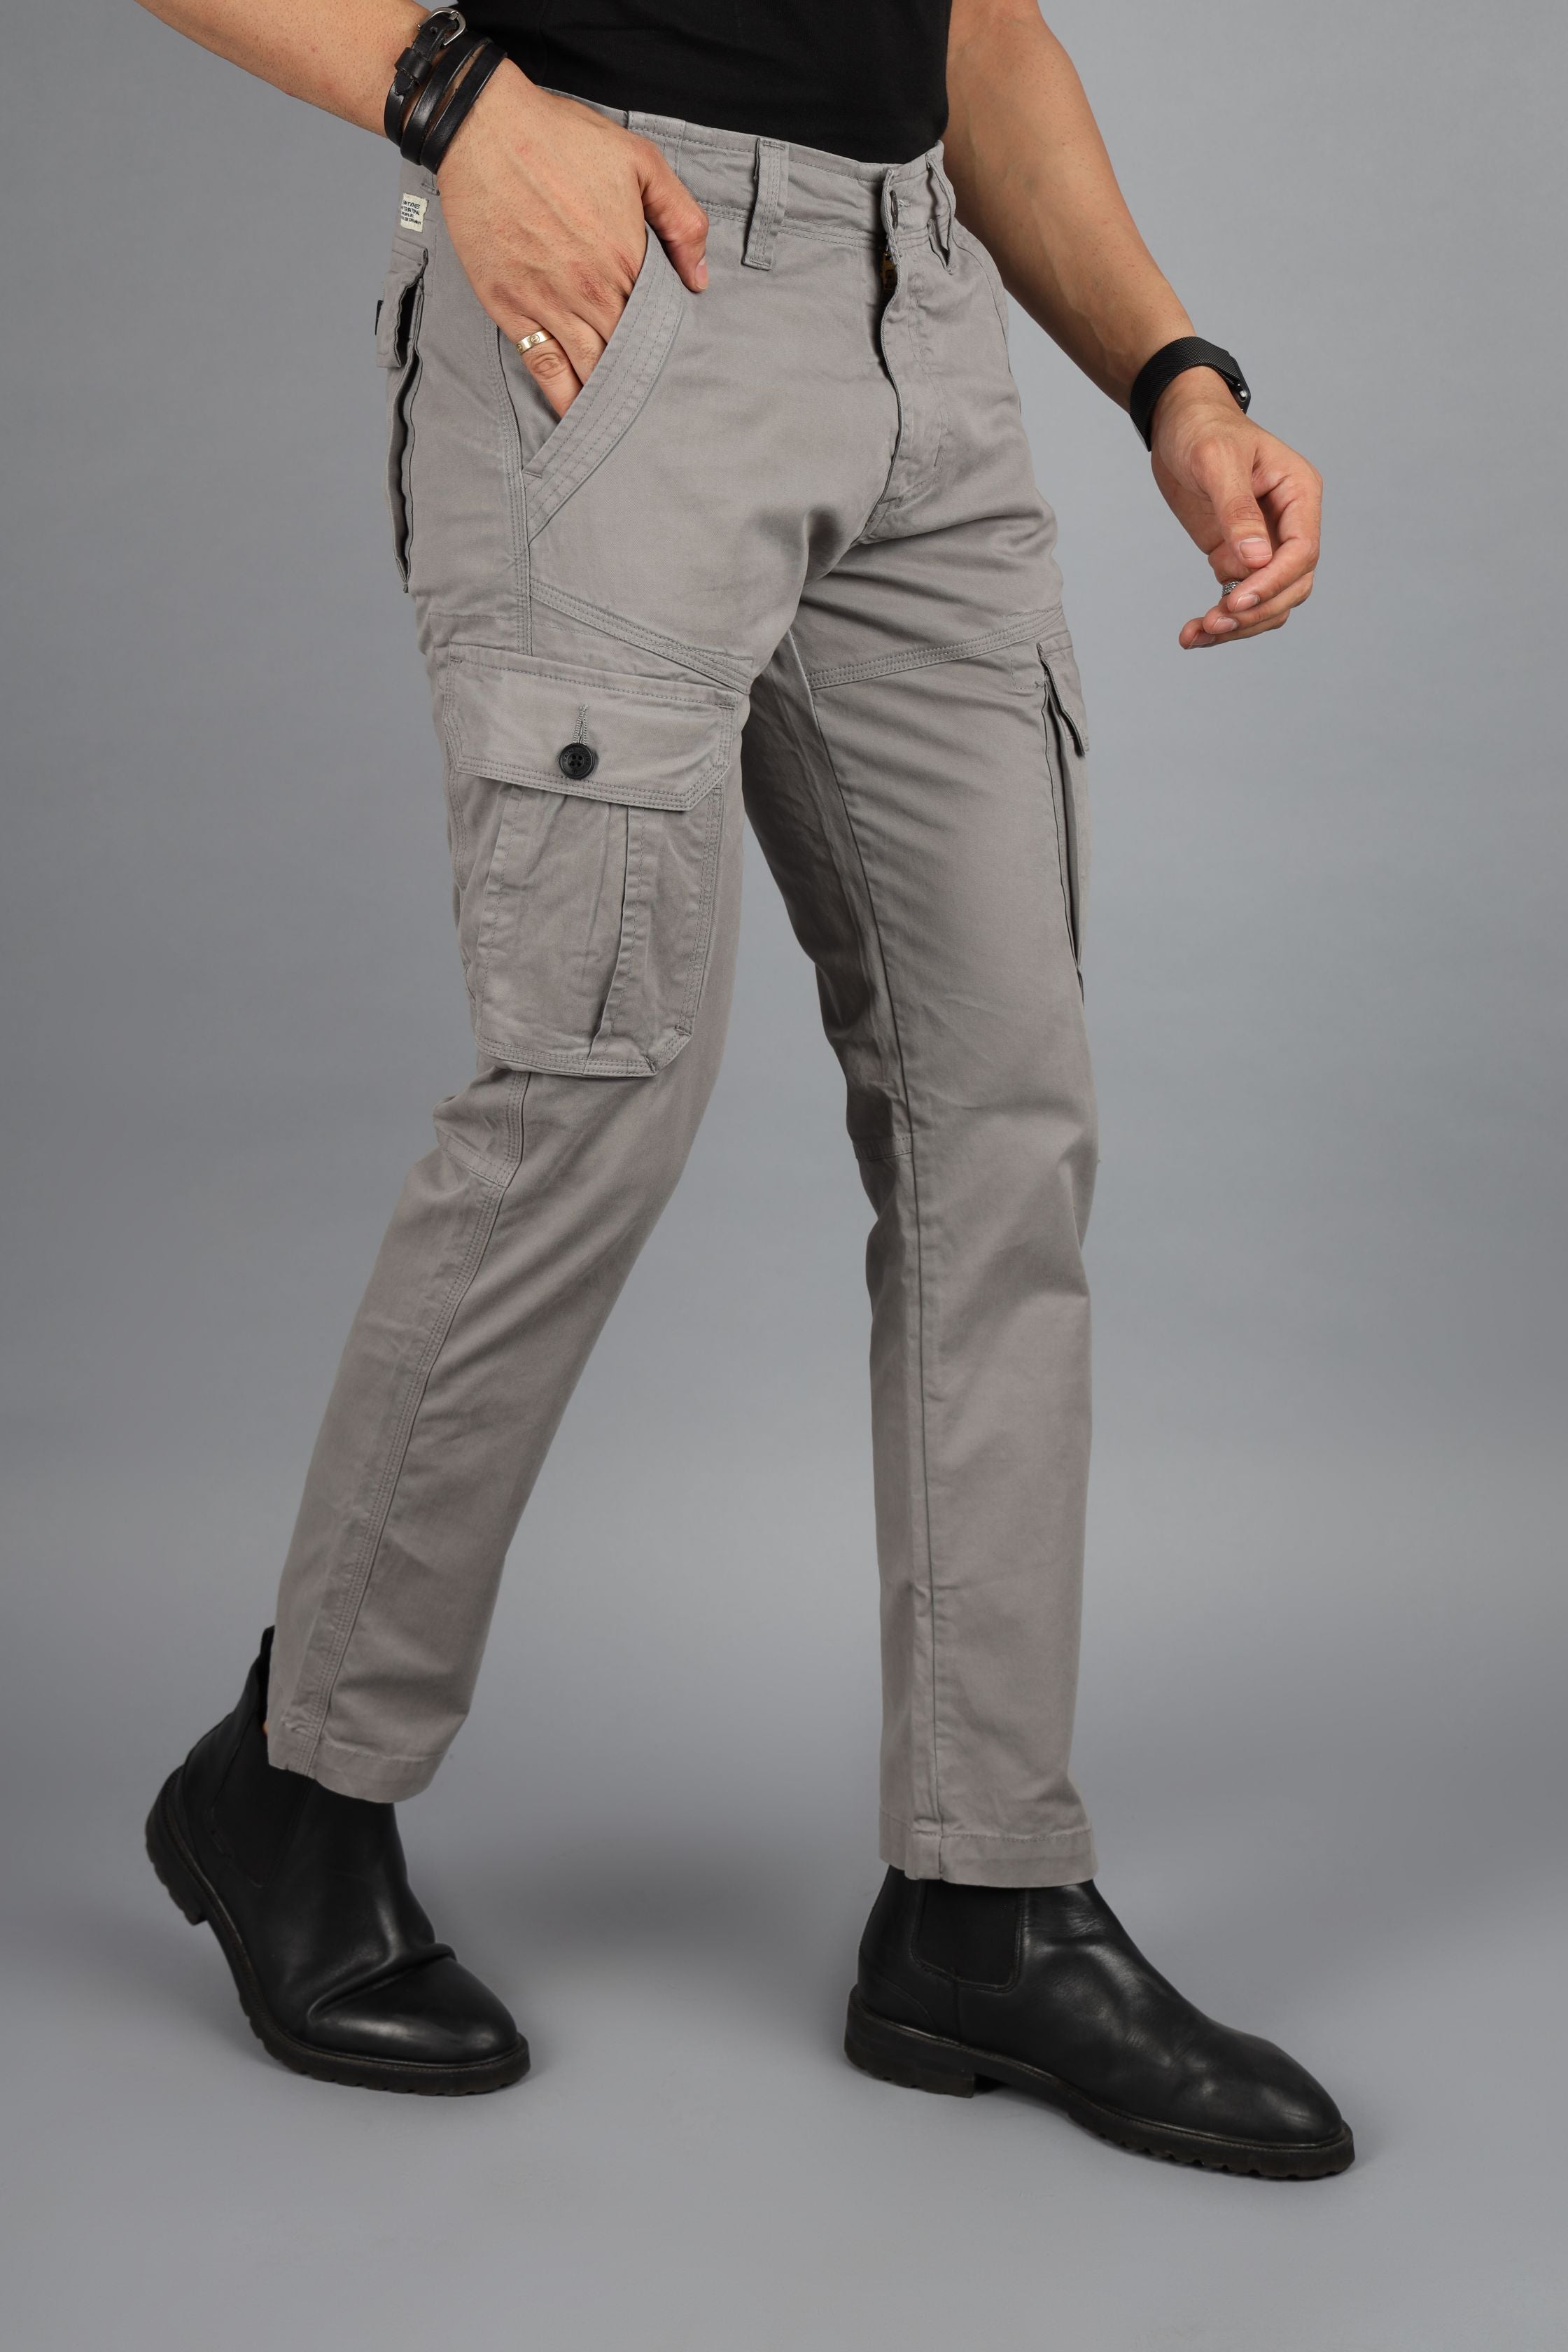 Shop Latest Grey Cargo Pants Mens Online at Great Price